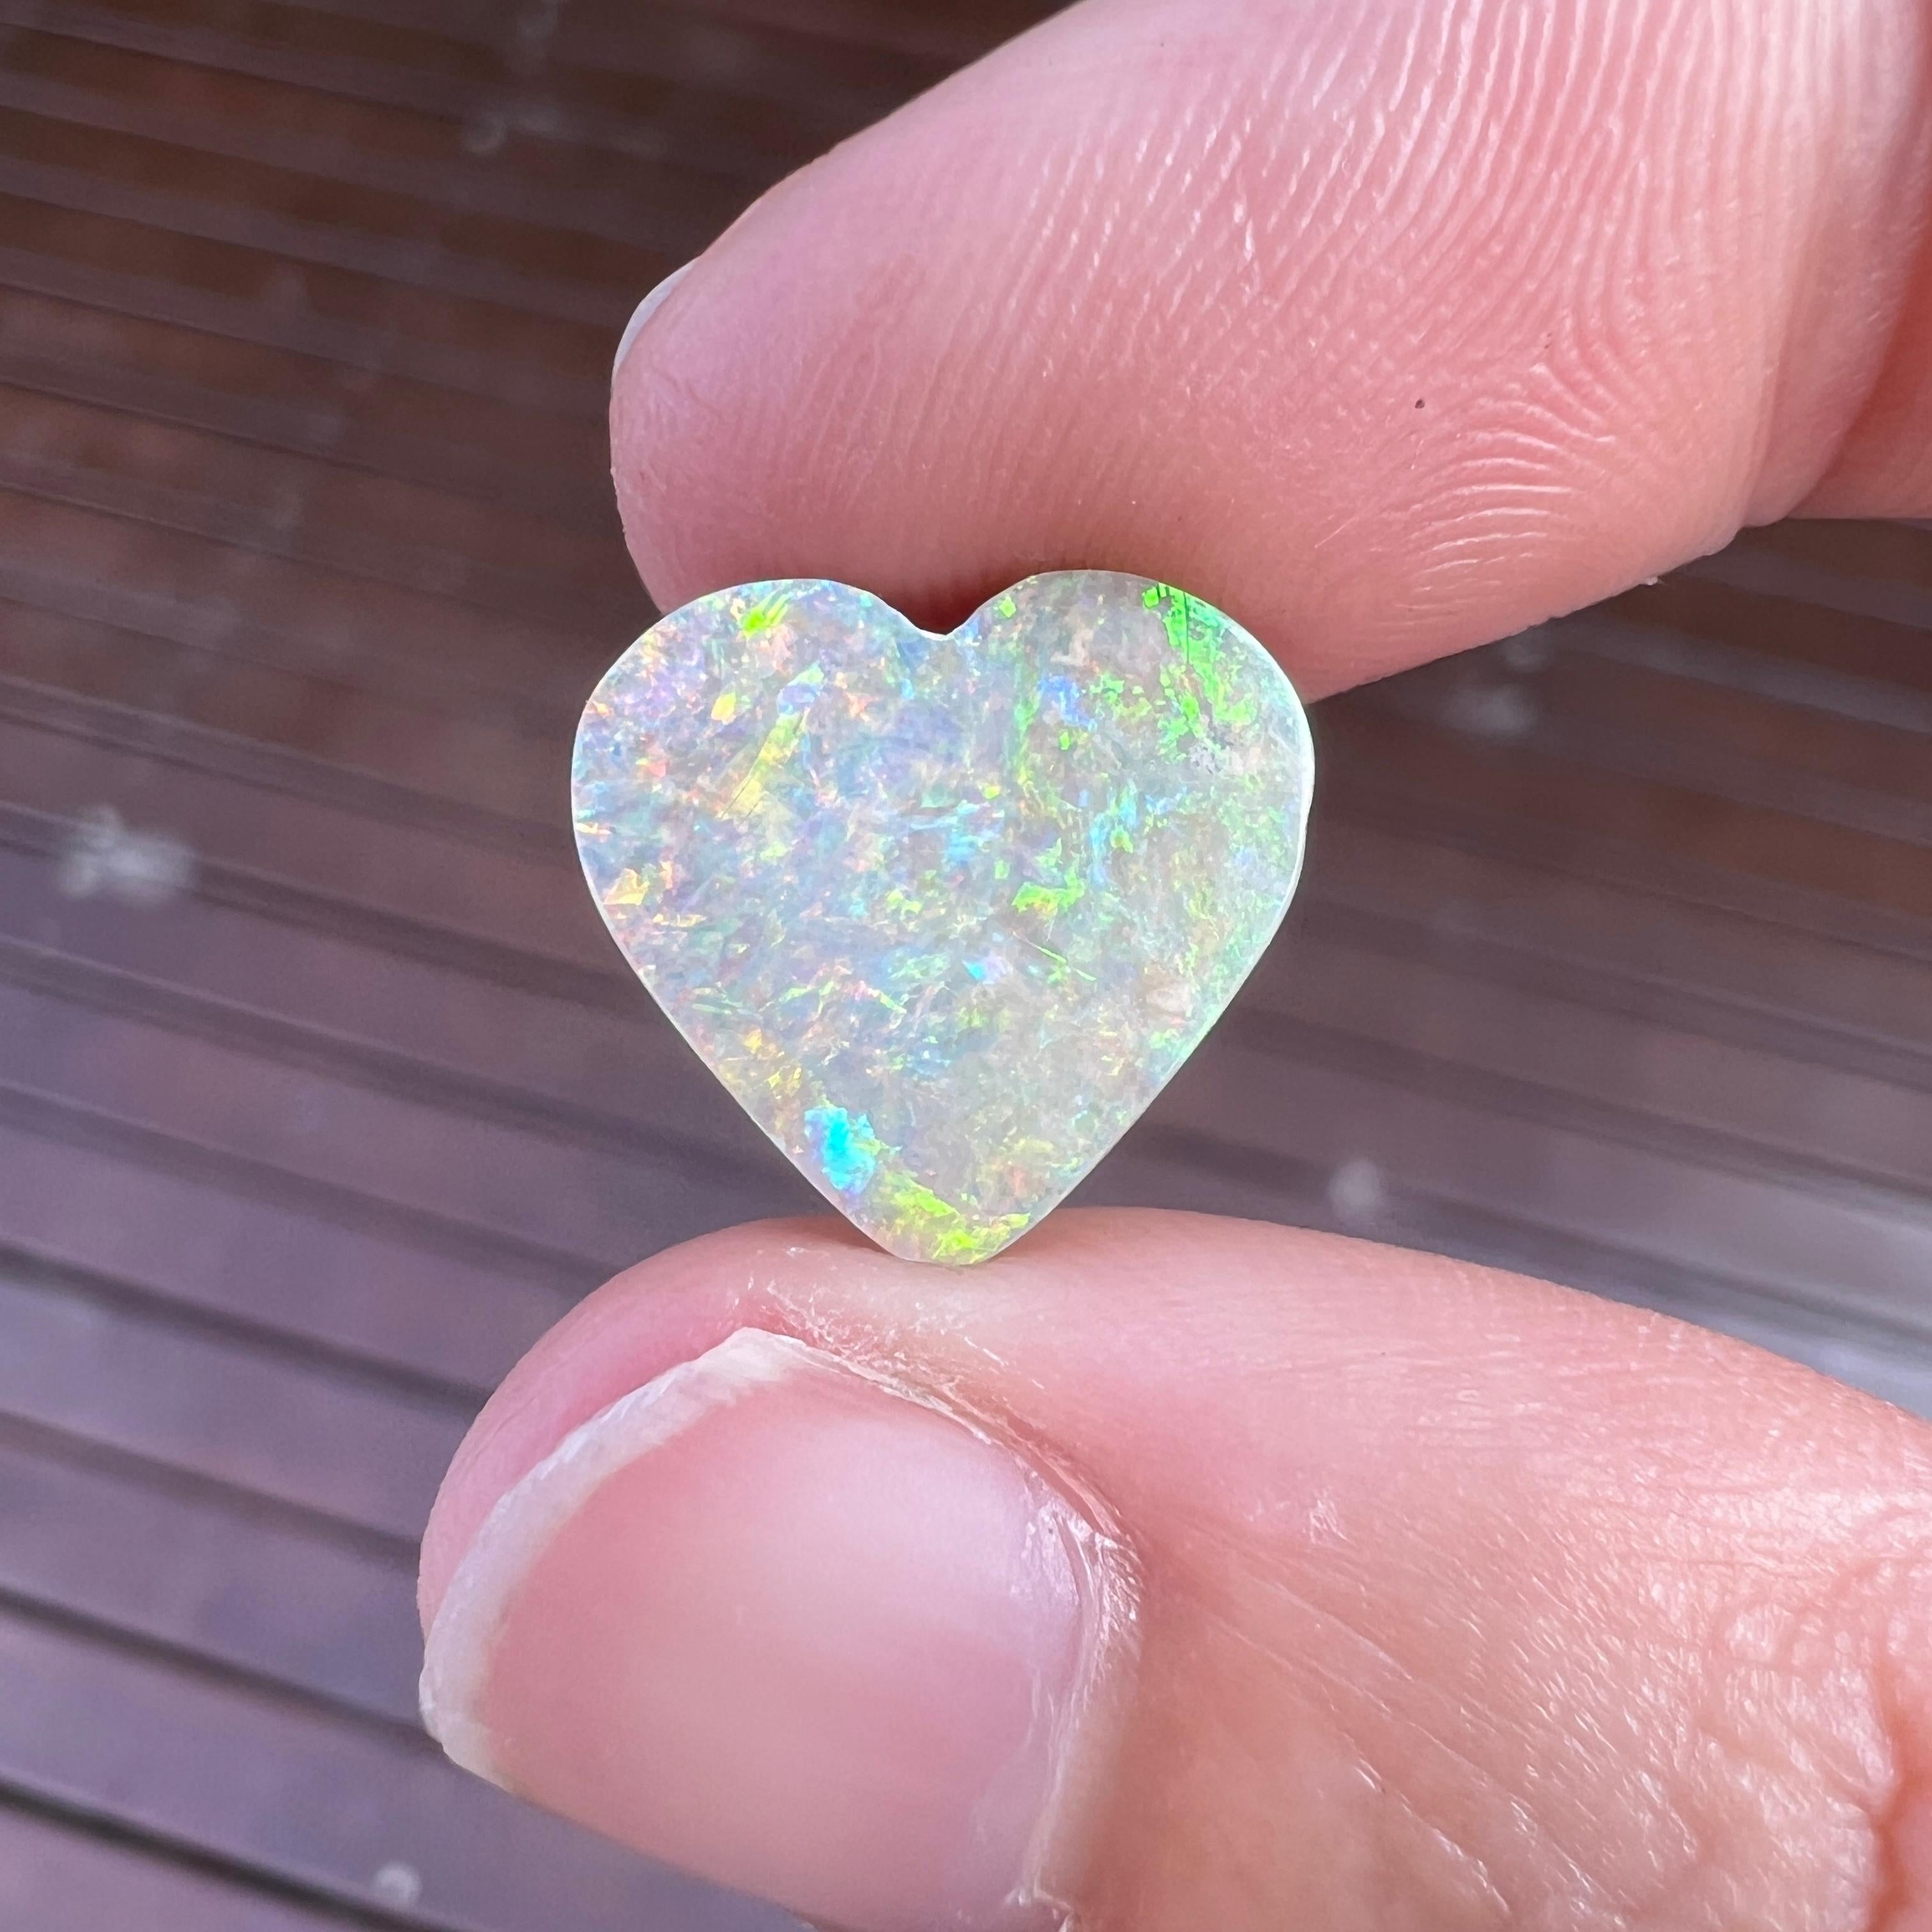 This lovely 4.14 Ct Australian boulder opal was mined by Sue Cooper at her Yaraka opal mine in western Queensland, Australia in 2021. Sue processed the rough opal herself and cut into into an heart shape. We especially love the gold, orange and blue